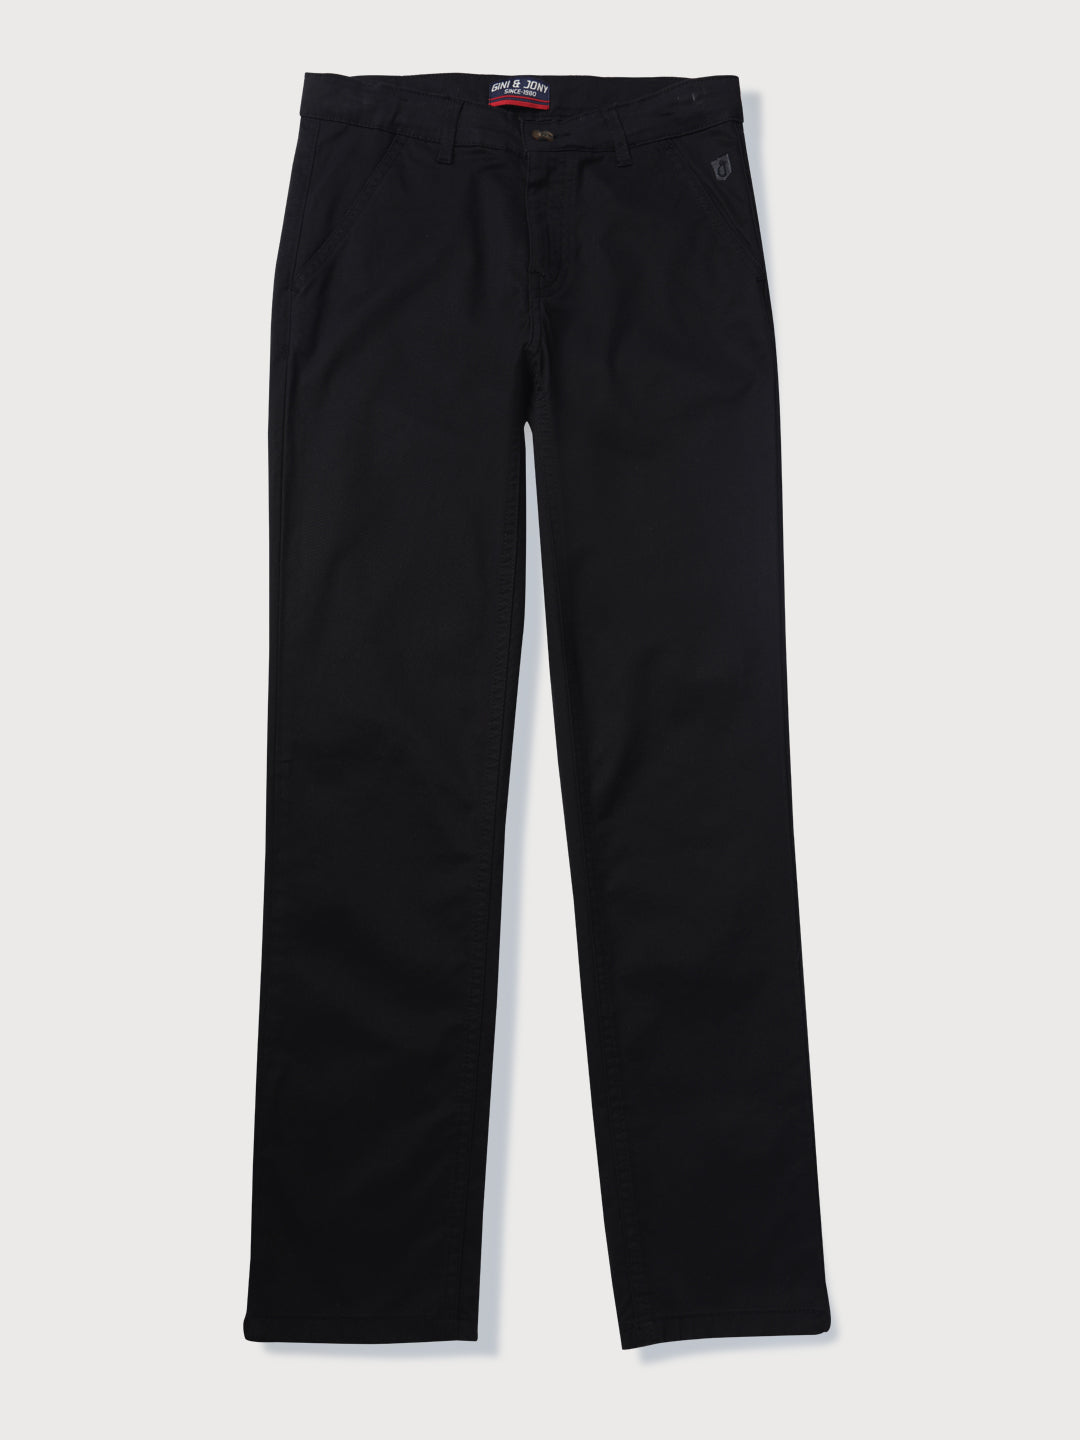 Boys Black Cotton Solid Fixed Waist Trouser